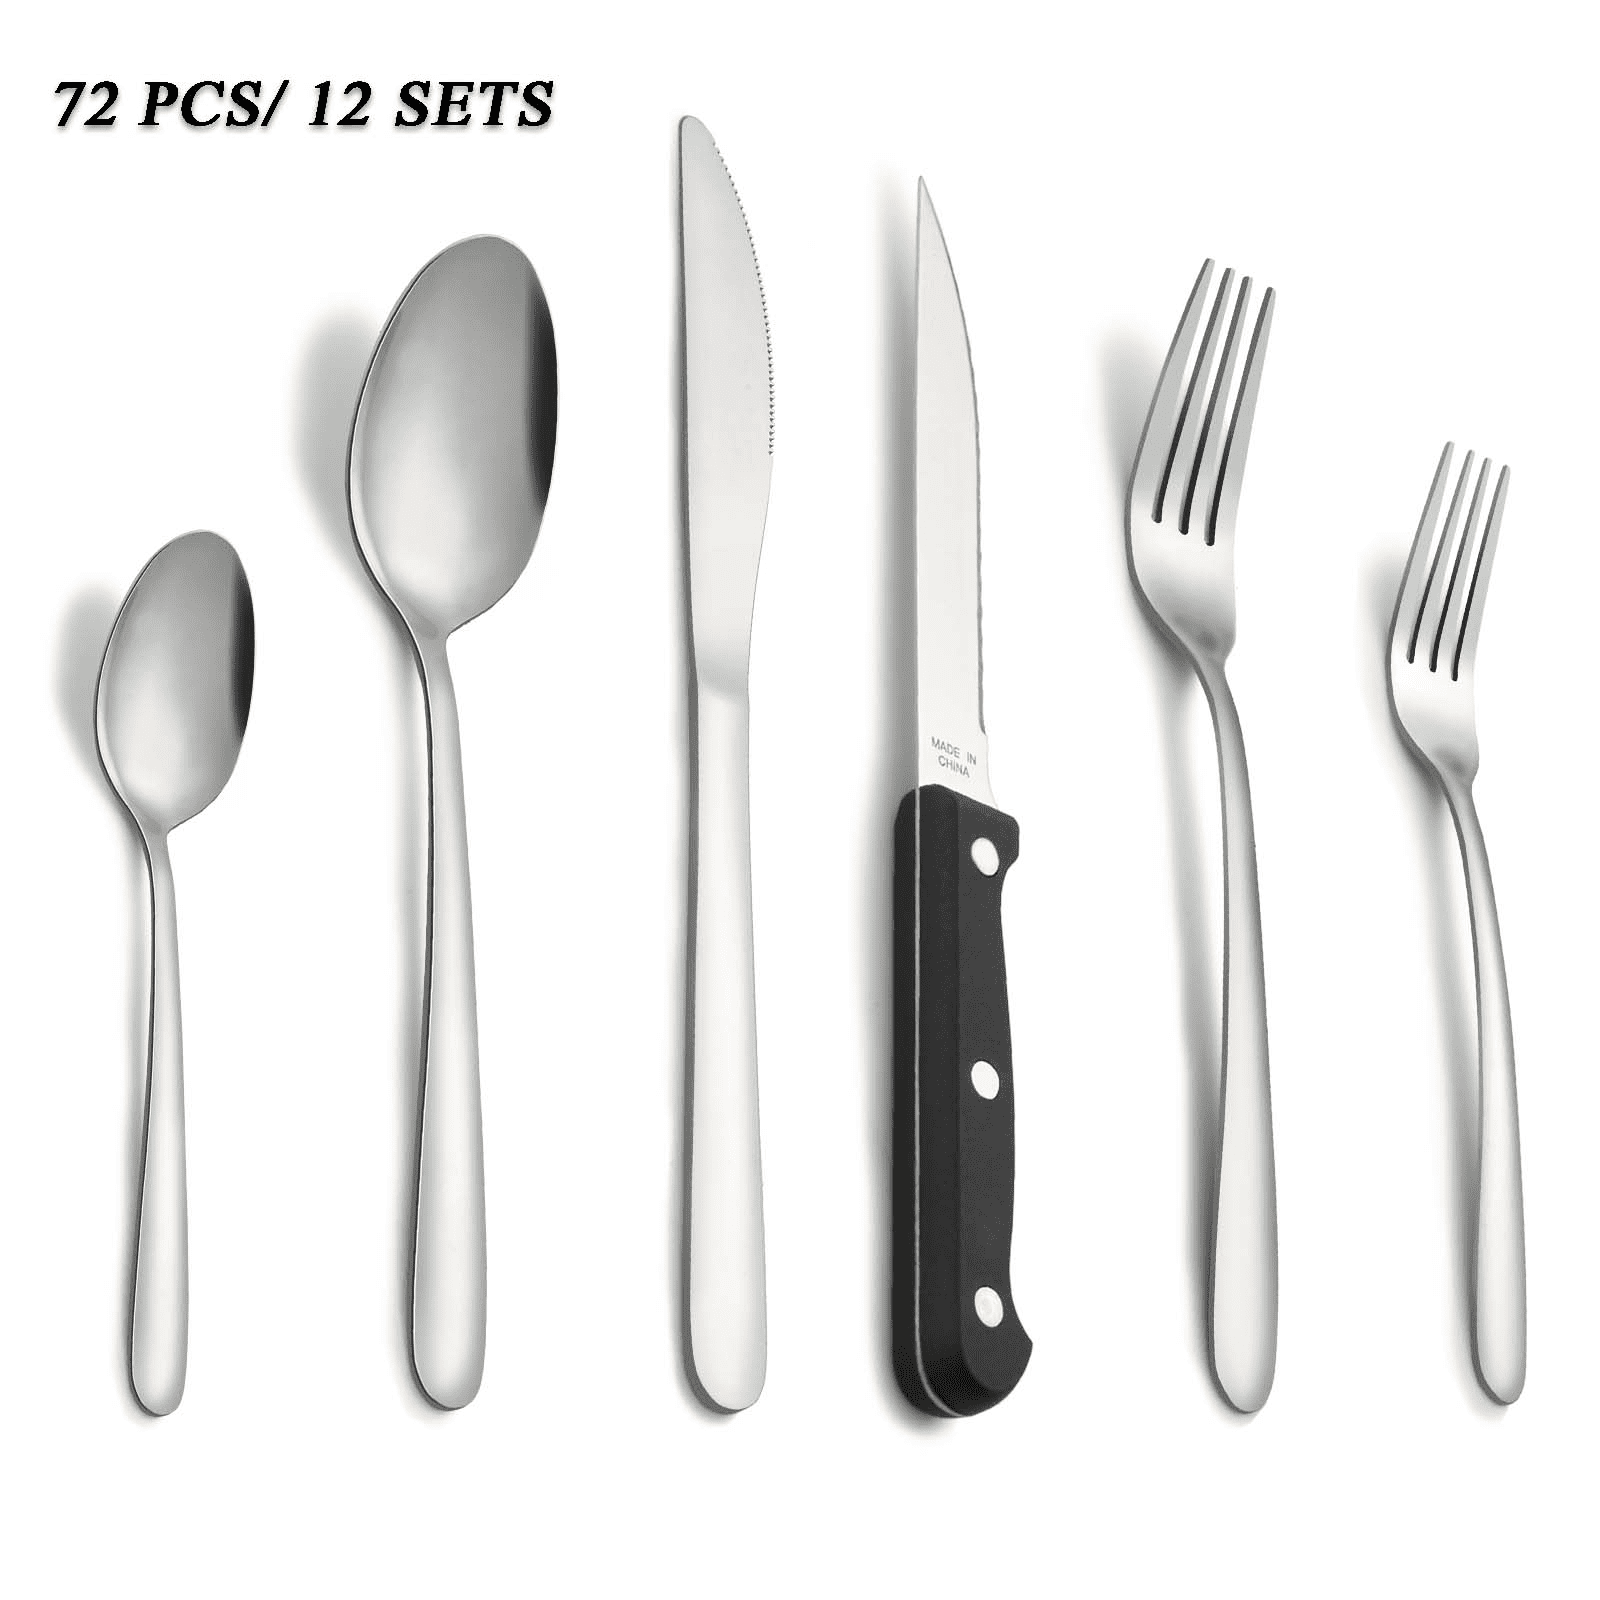 72-Piece Silverware Set, Umite Chef Flatware Set with Steak Knives for 12,  Food-Grade Stainless - China Hotel Supply and Mirror Polish price